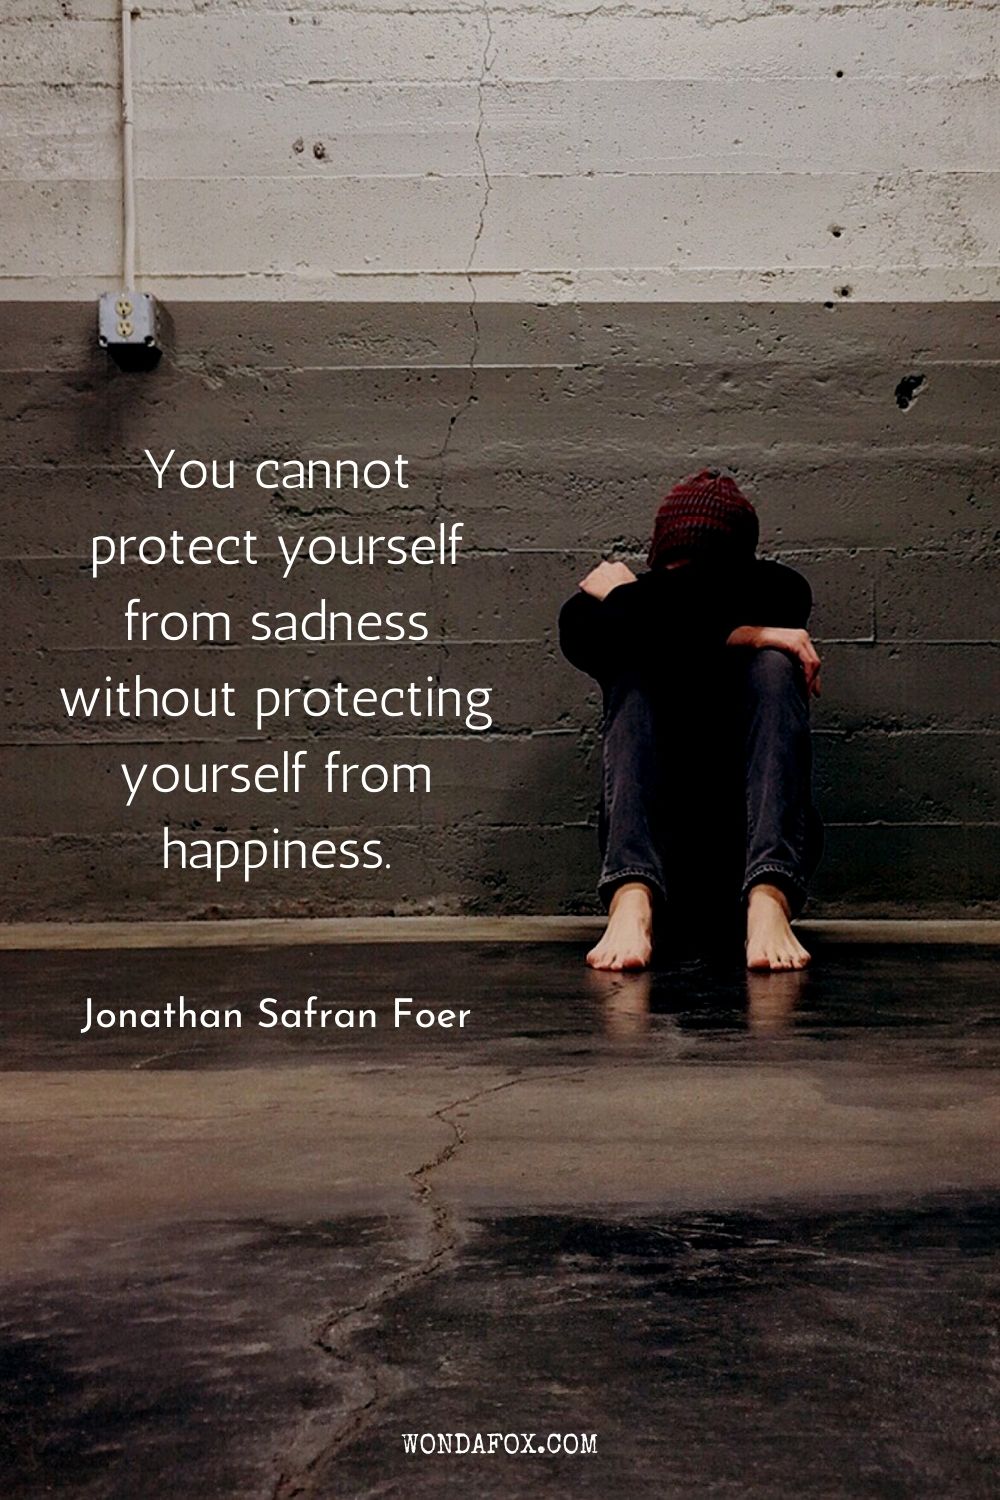 You cannot protect yourself from sadness without protecting yourself from happiness.